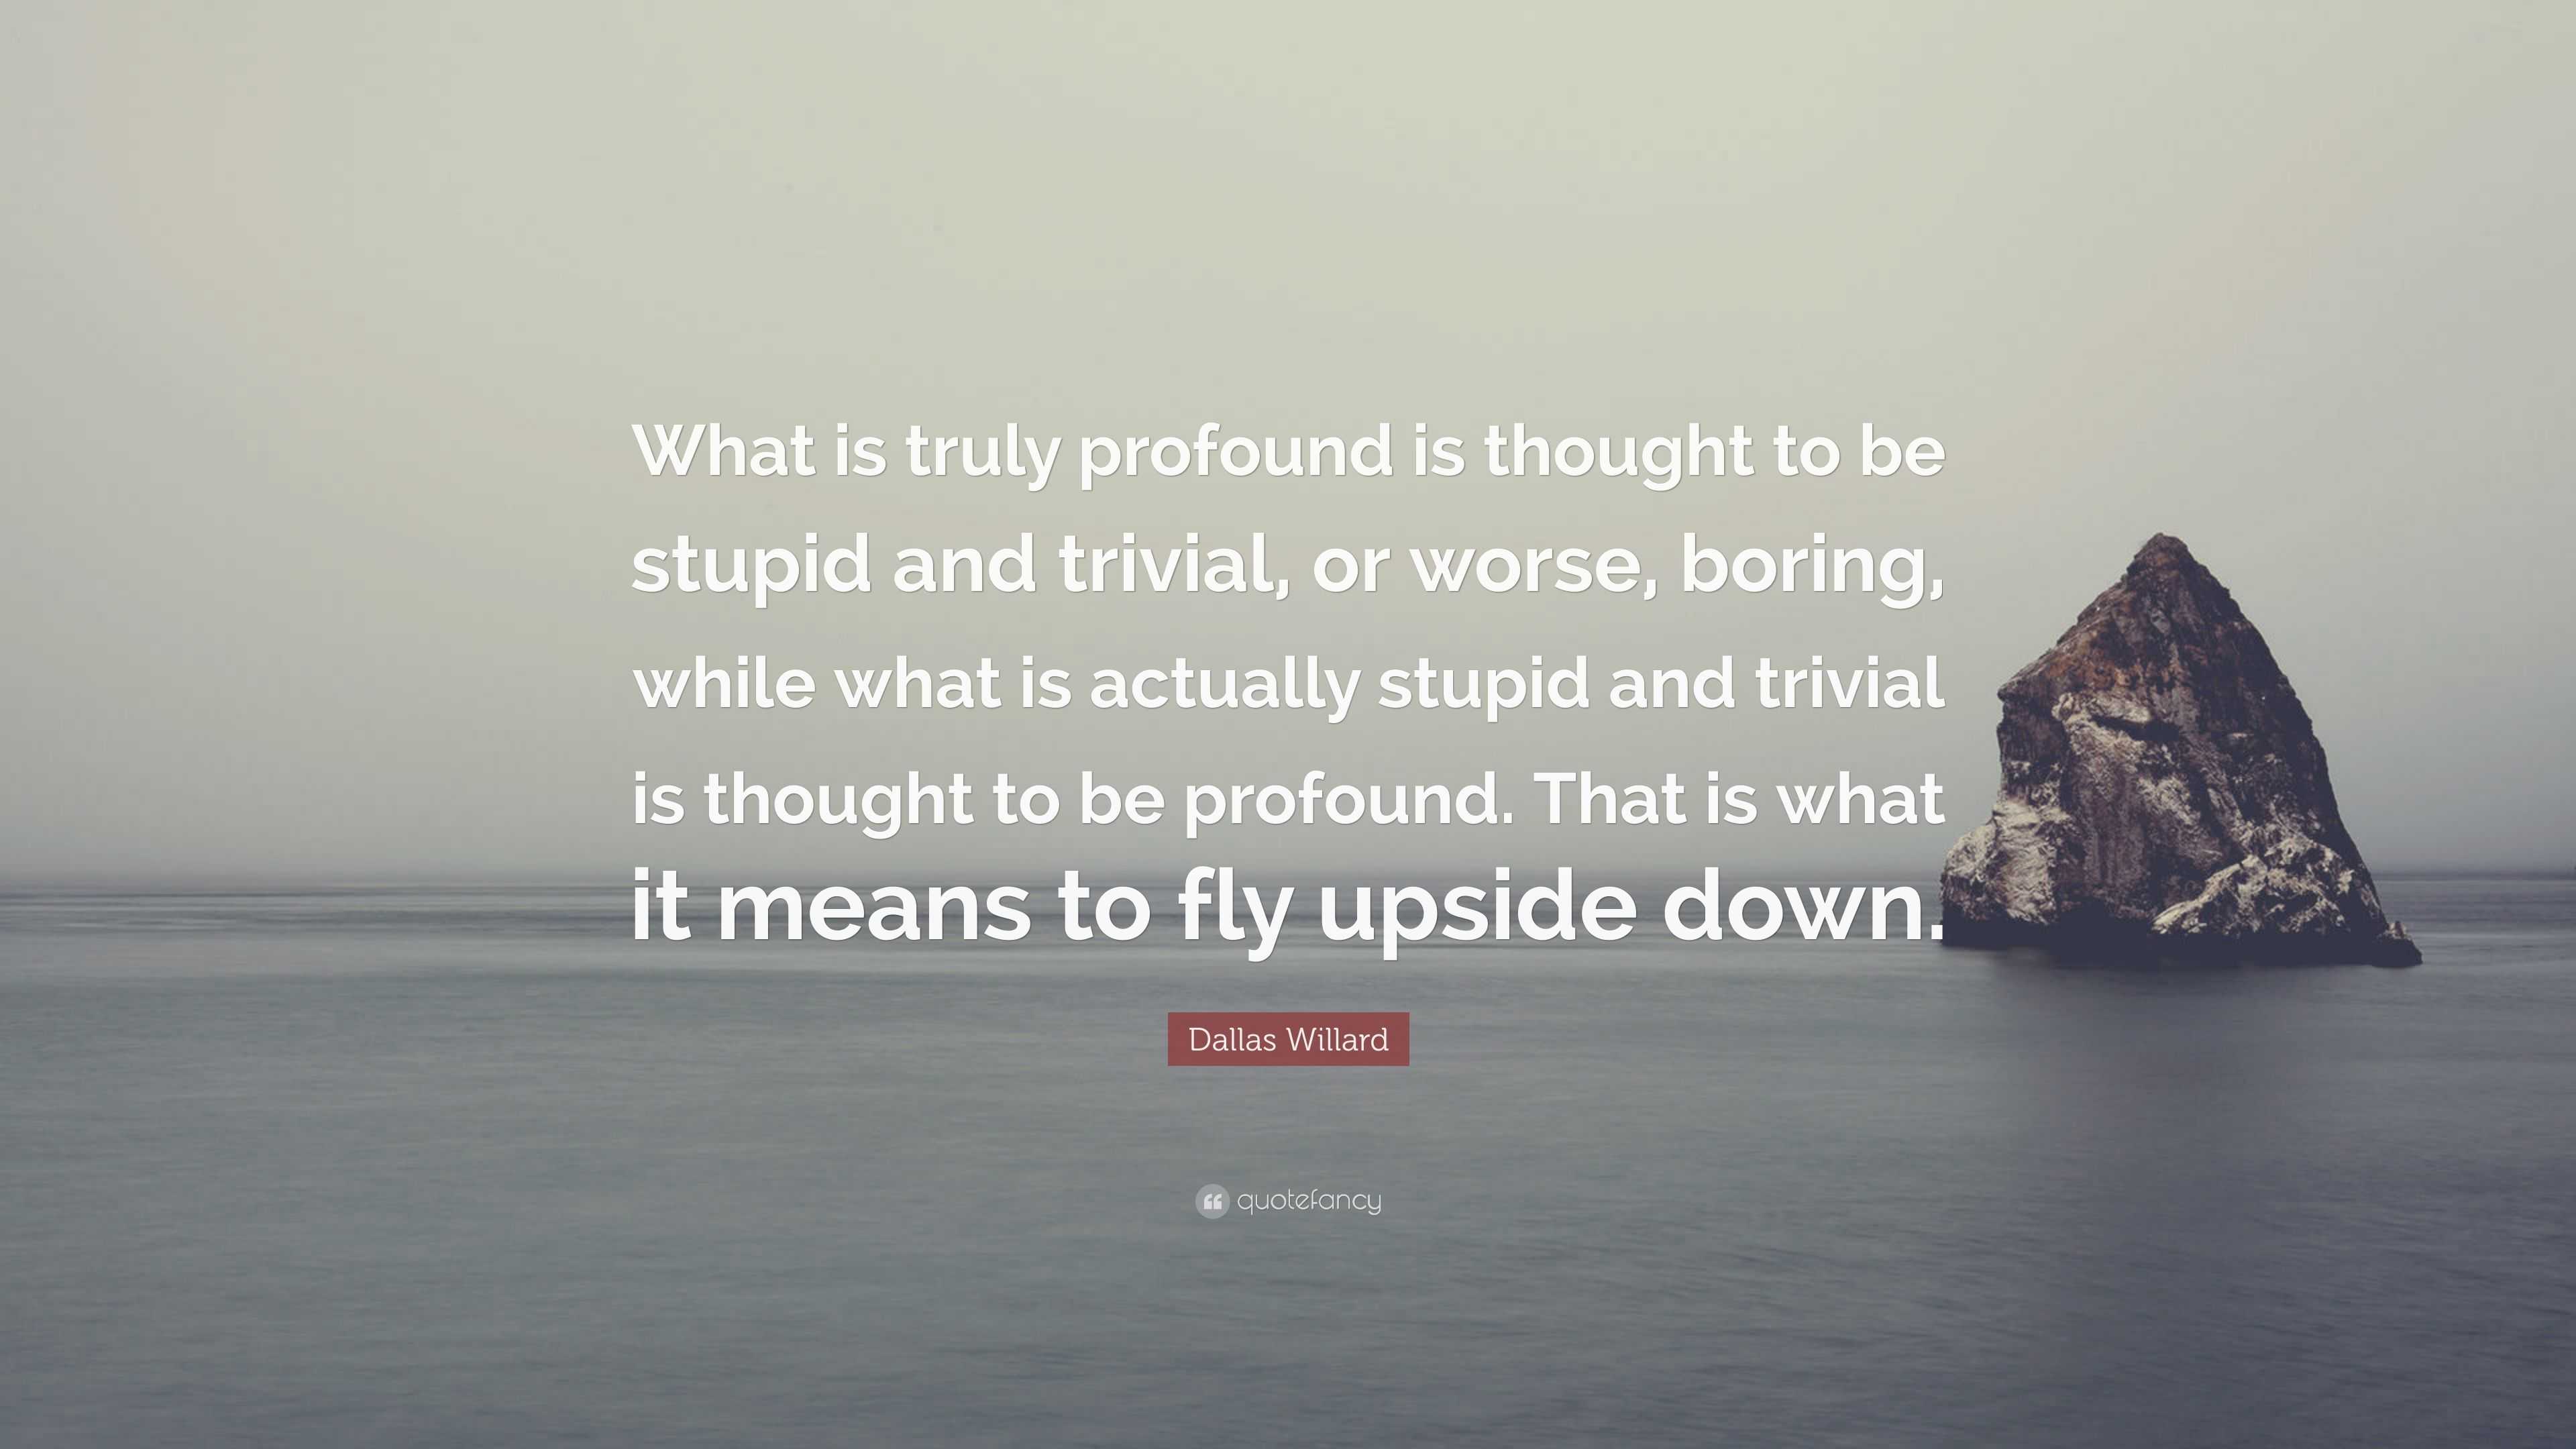 Dallas Willard Quote: “What is truly profound is thought to be stupid ...